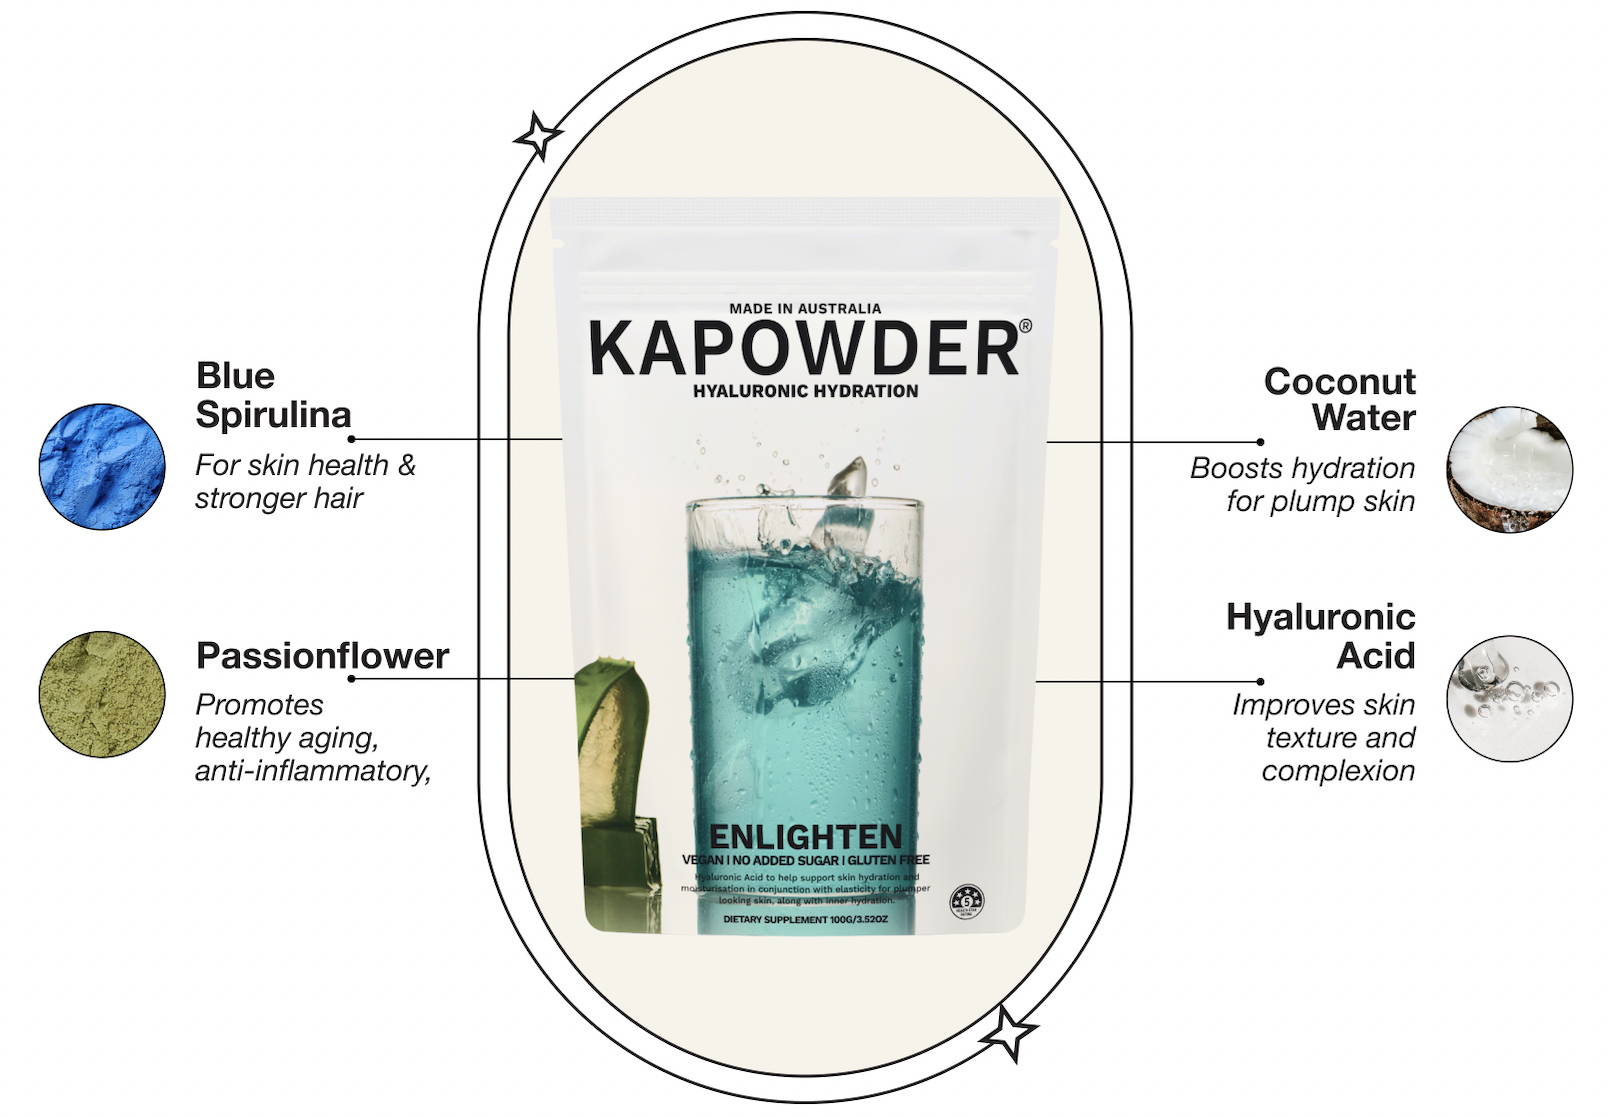 Hero ingredients: blue spirulina (for skin health and stronger hair); passionflower (promotes healthy ageing, anti-inflammatory); coconut water (boosts hydration for plump skin); hyaluronic acid (improves skin texture and complexion).